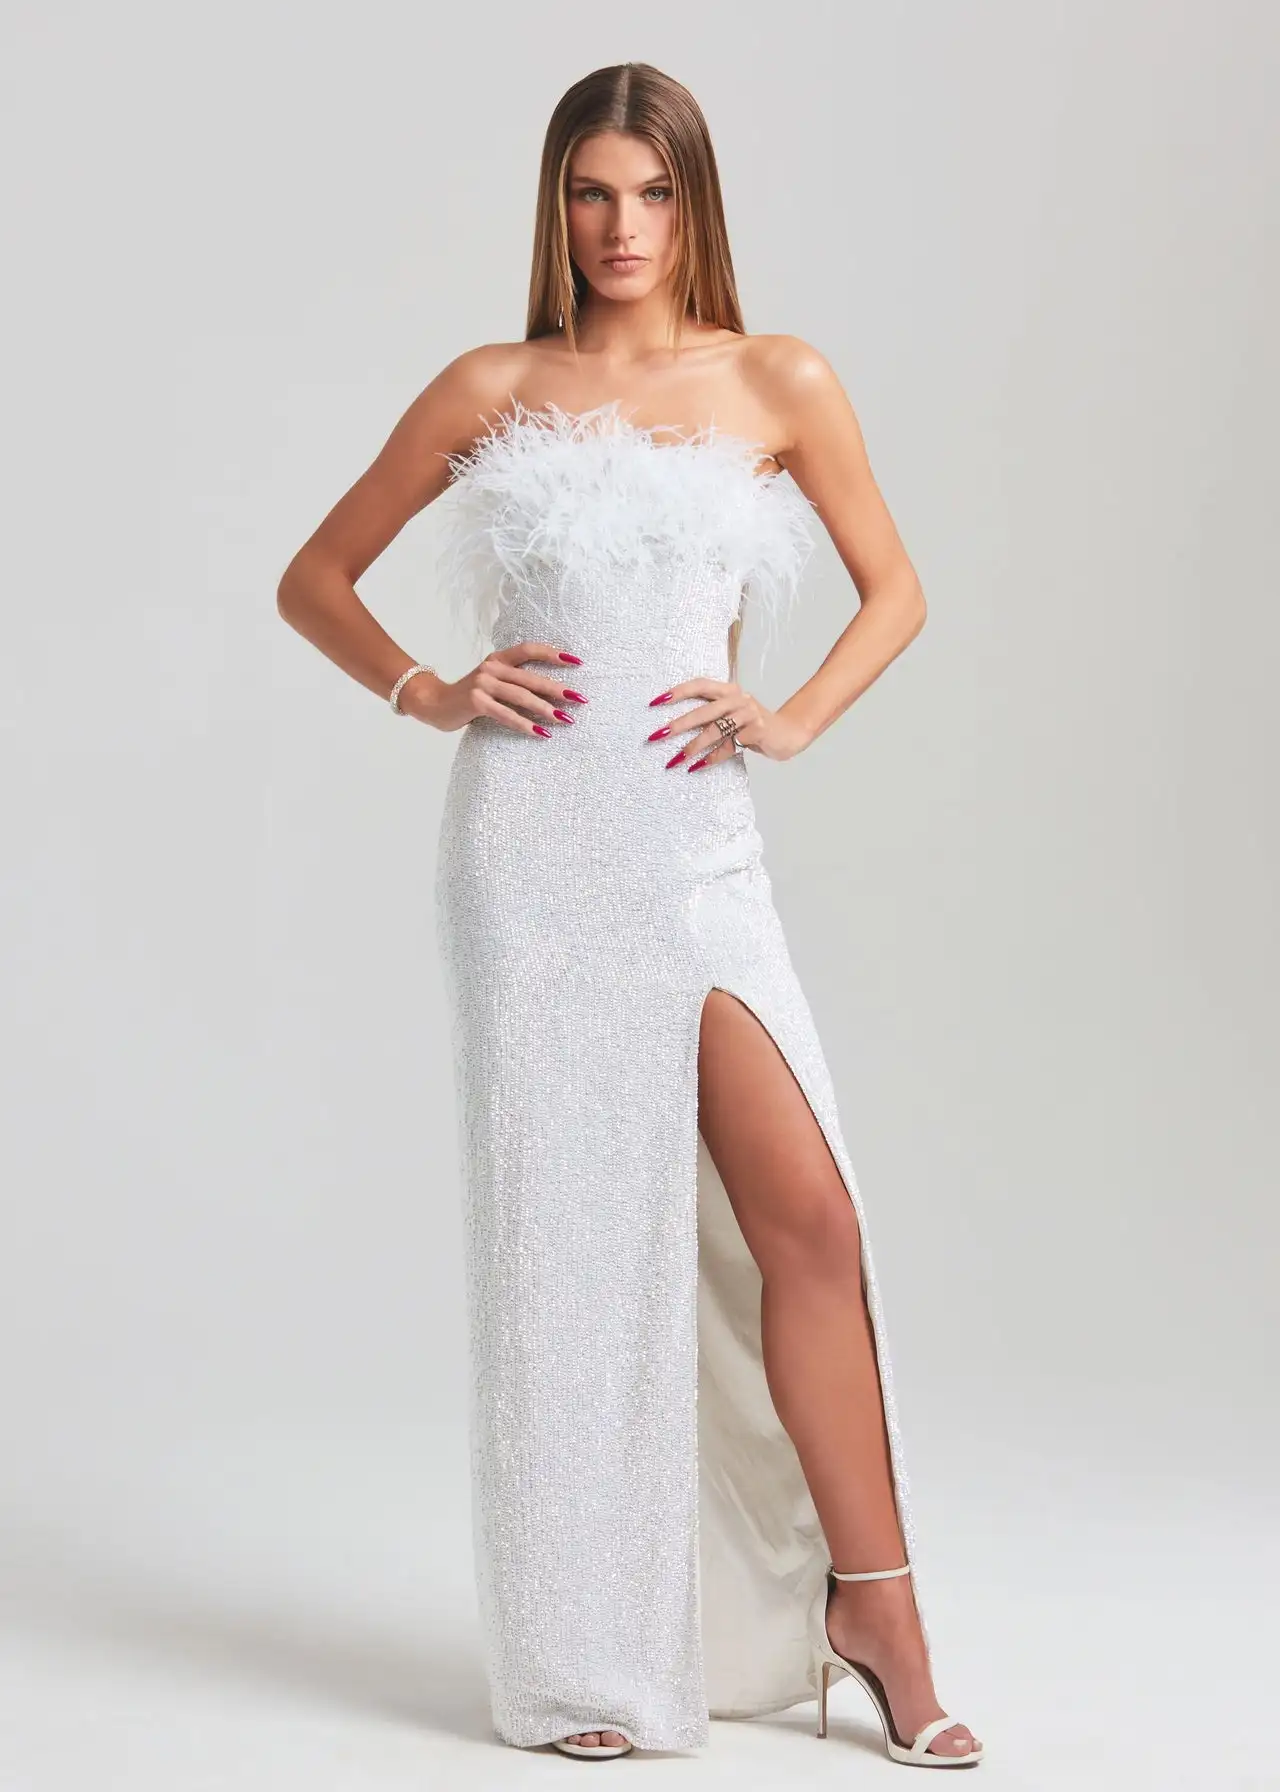 White Shinning Sequines Women Off the Shoulder Sexy Feathers High Split Bodycon Long Dress Elegant Evening Party Celebrate Dress